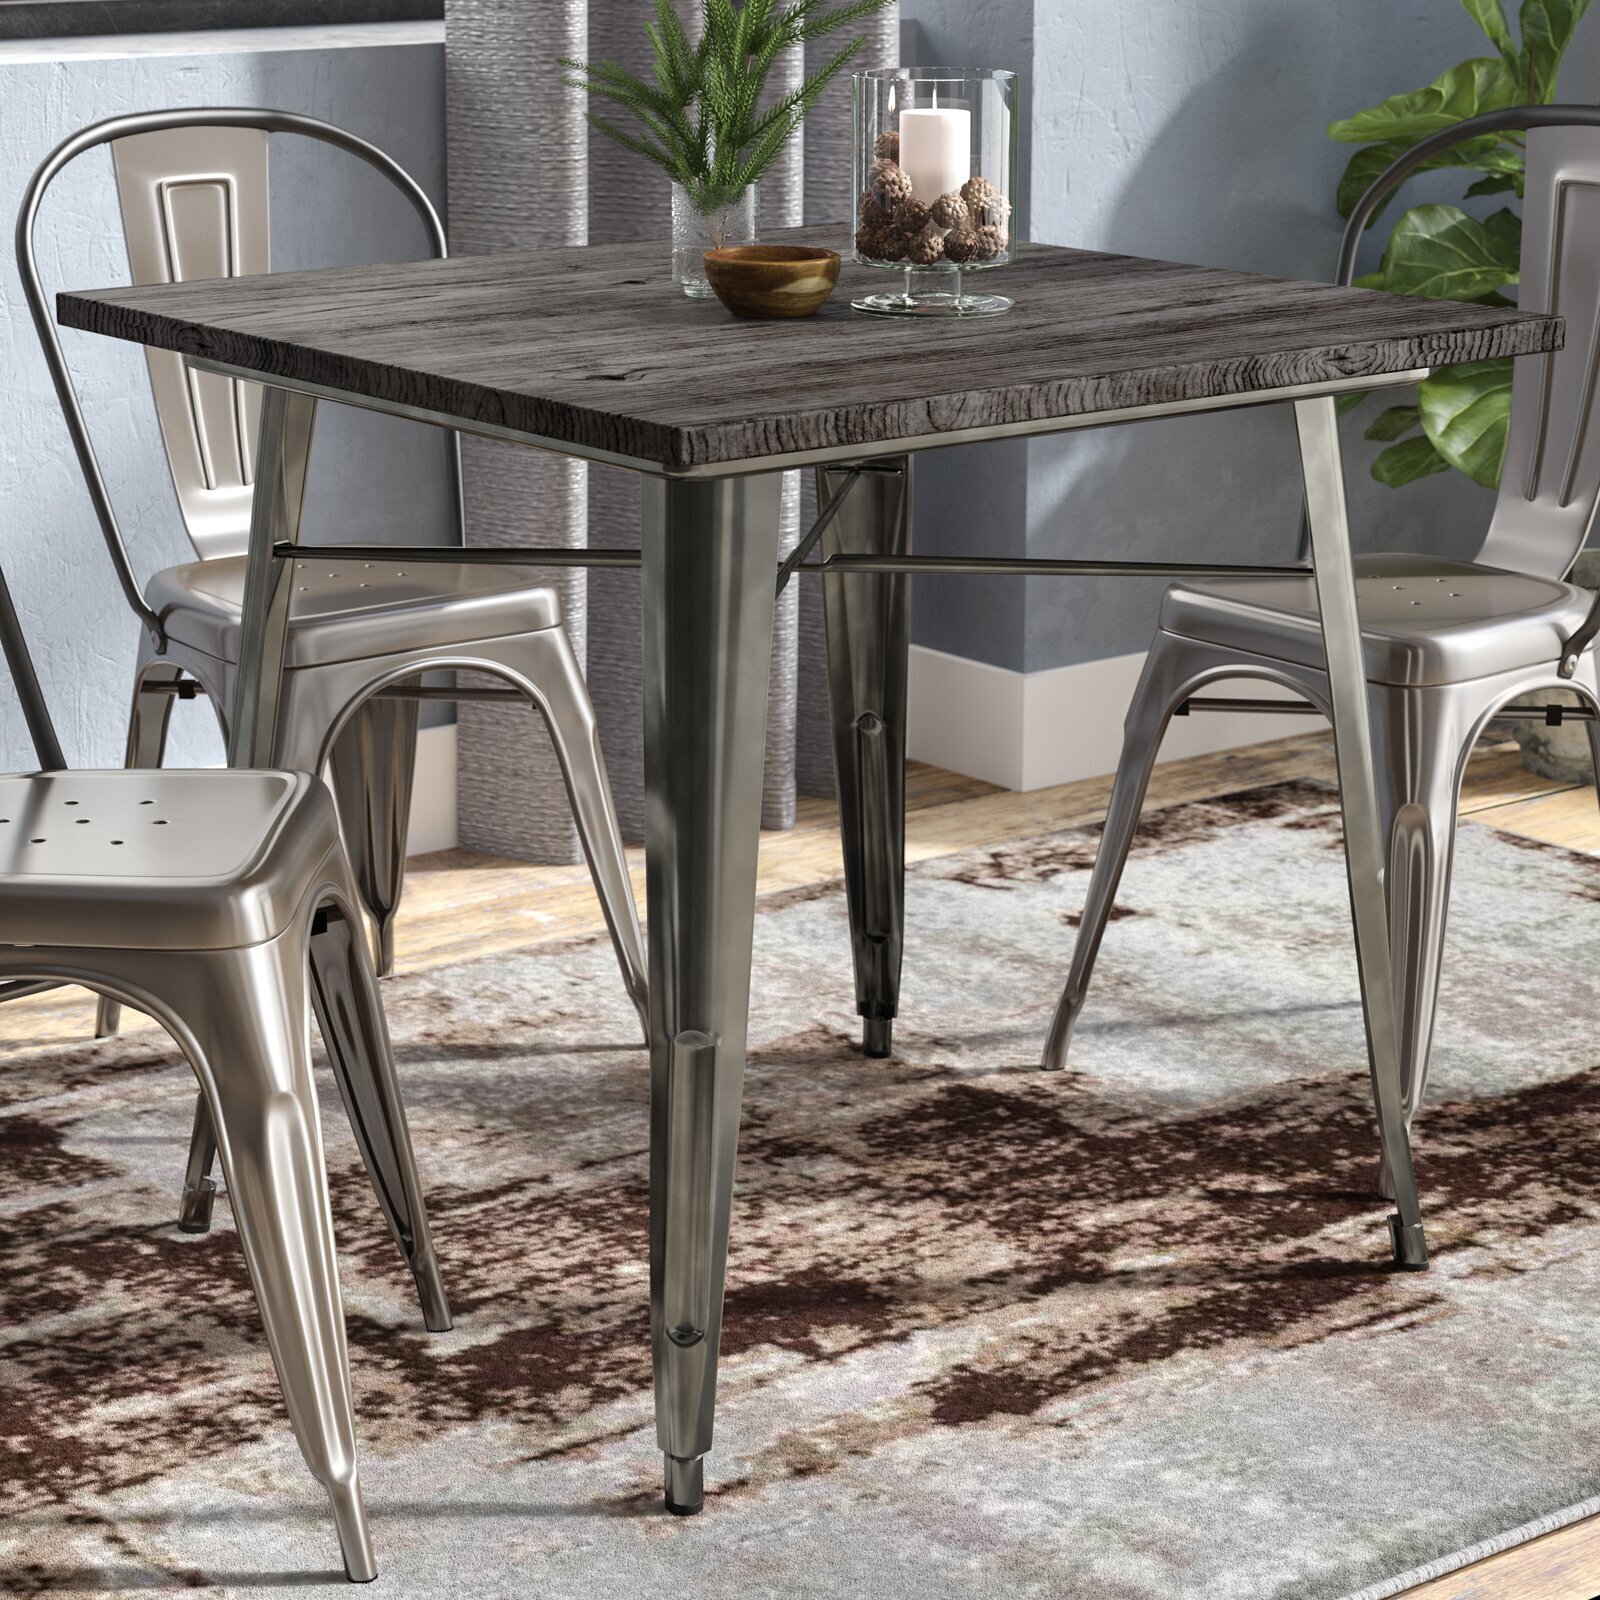 Steel and Wood Dining Table Industrial Design